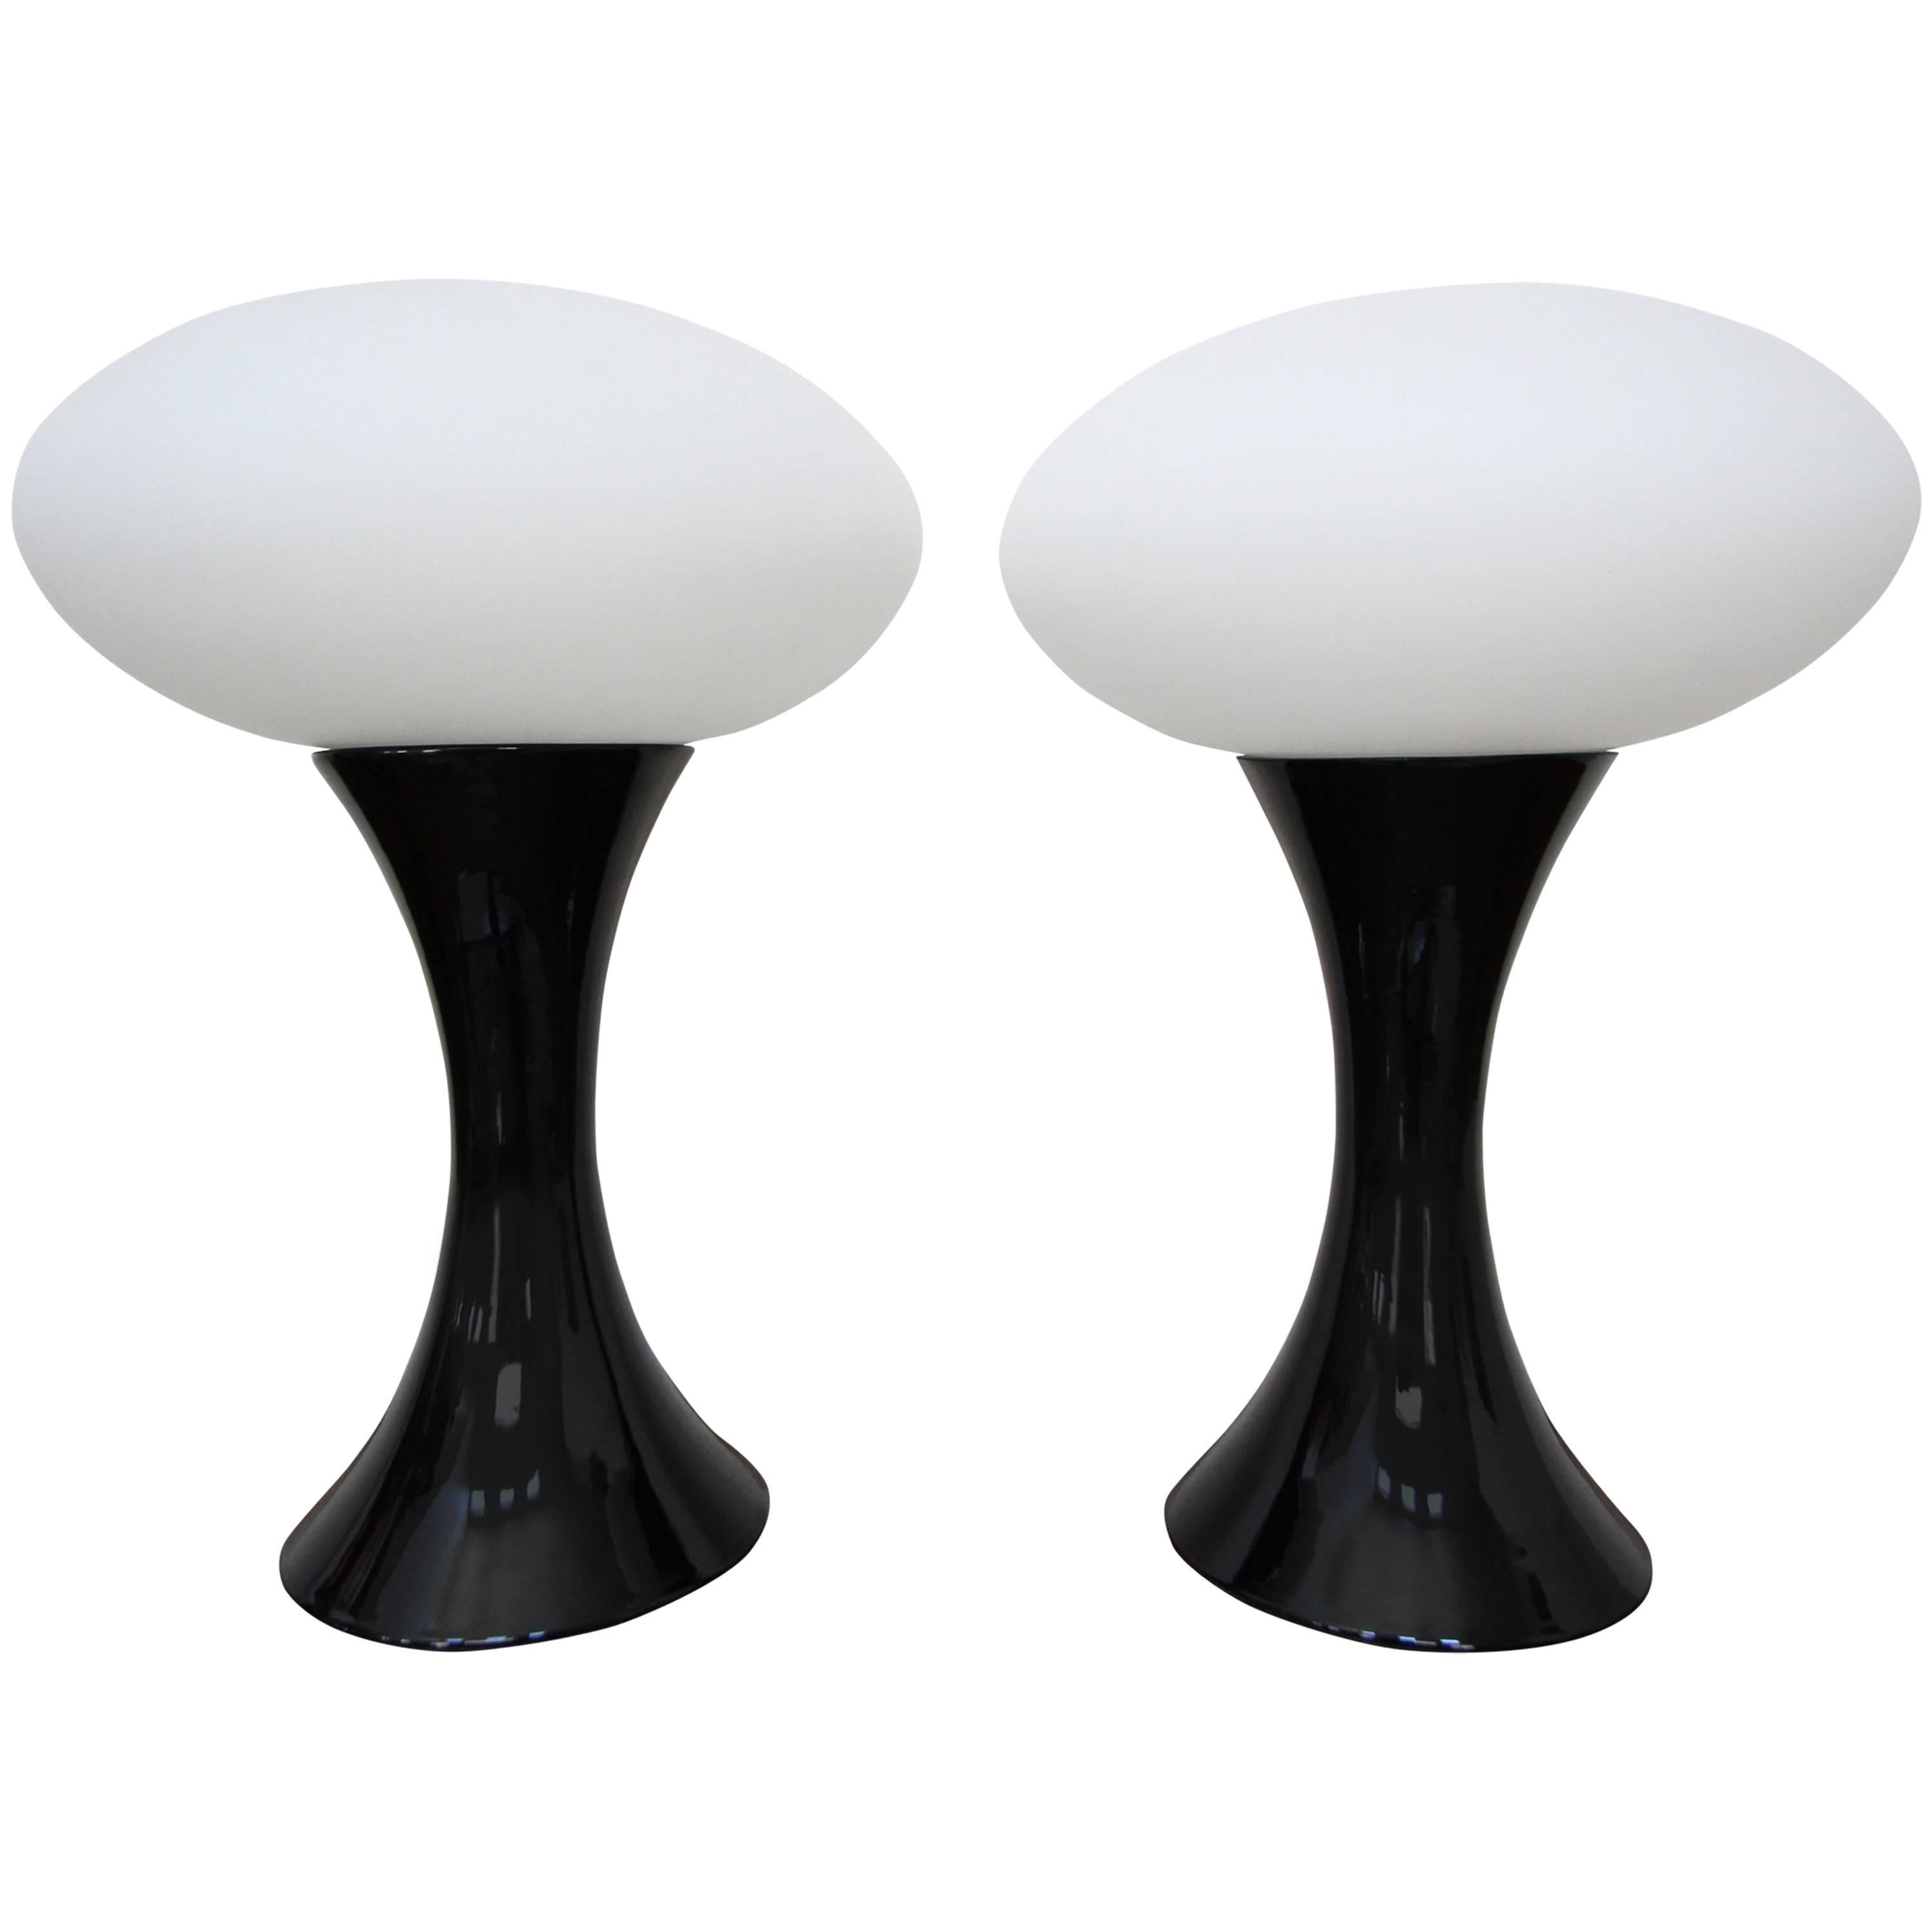 This is a perfect pair of Italian ceramic and porcelain table lamps. Finished in a high gloss and topped with a classic Laurel Lamp Company style shade, these beauties are real show stoppers.

Dimensions:
Overall: 20.25